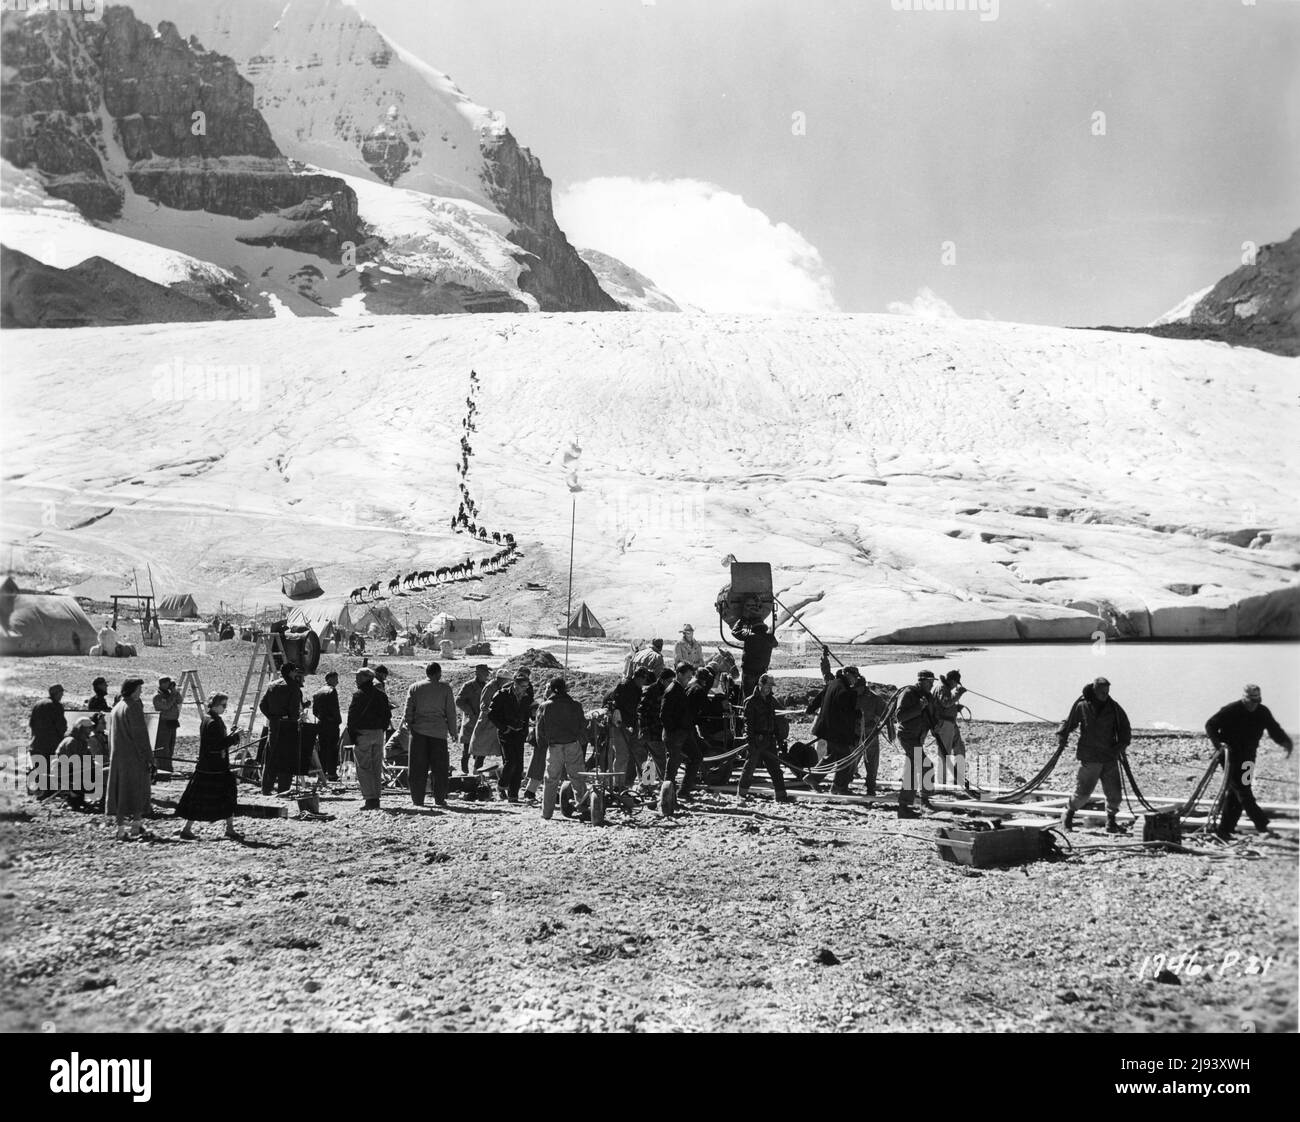 JAMES STEWART (on horse) and Movie Crew on set location candid filming on the Athabasca Glacier in Jasper National Park, Canada for THE FAR COUNTRY 1954 director ANTHONY MANN story / screenplay Borden Chase cinematography William H. Daniels Universal International Pictures Stock Photo